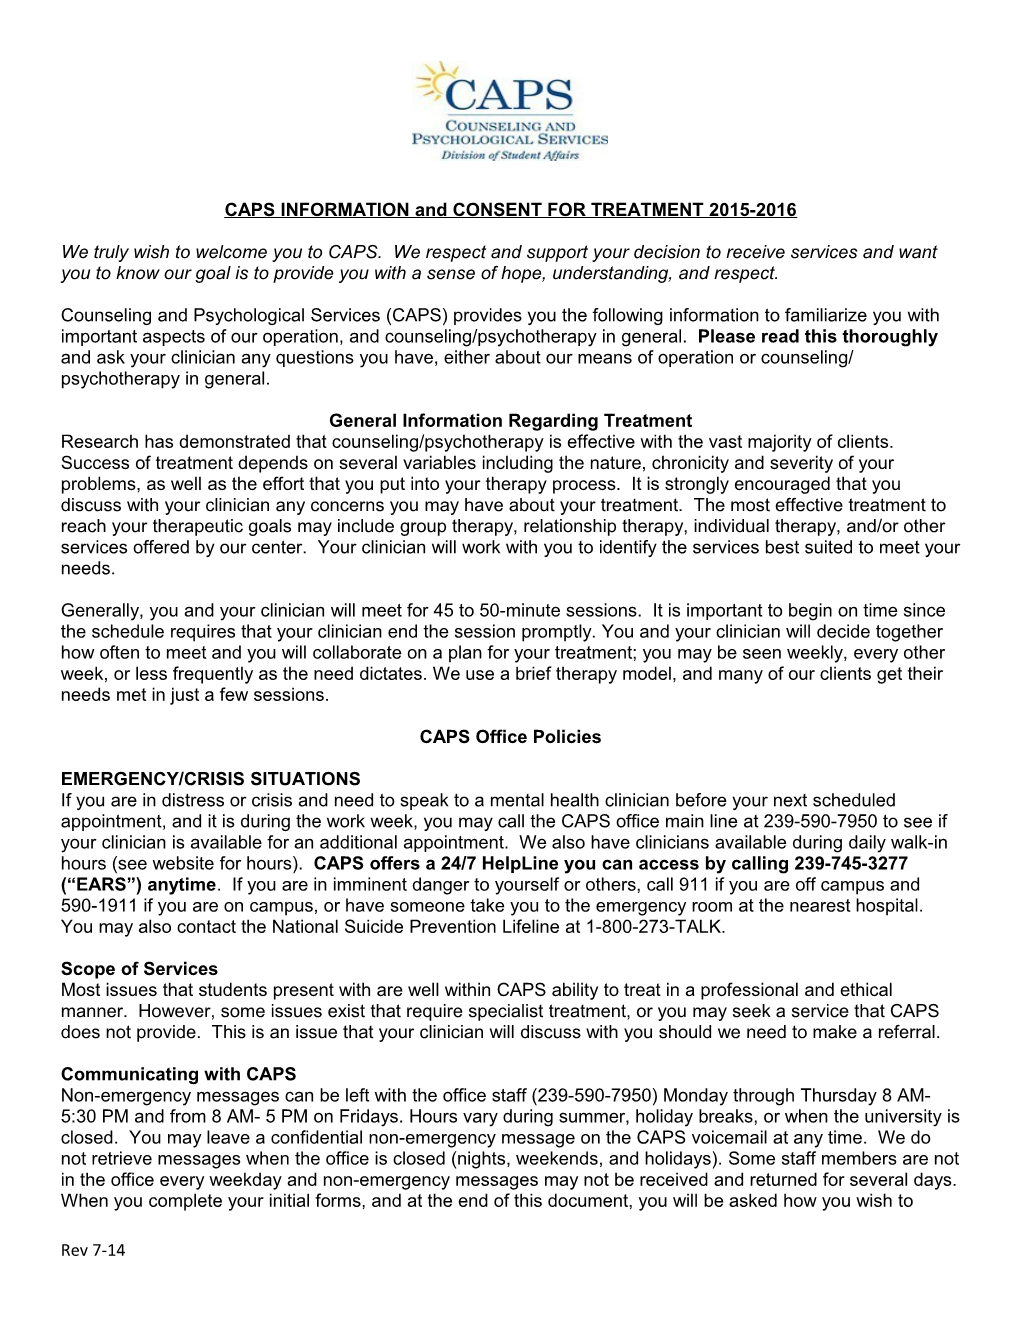 CAPS INFORMATION and CONSENT for TREATMENT 2015-2016